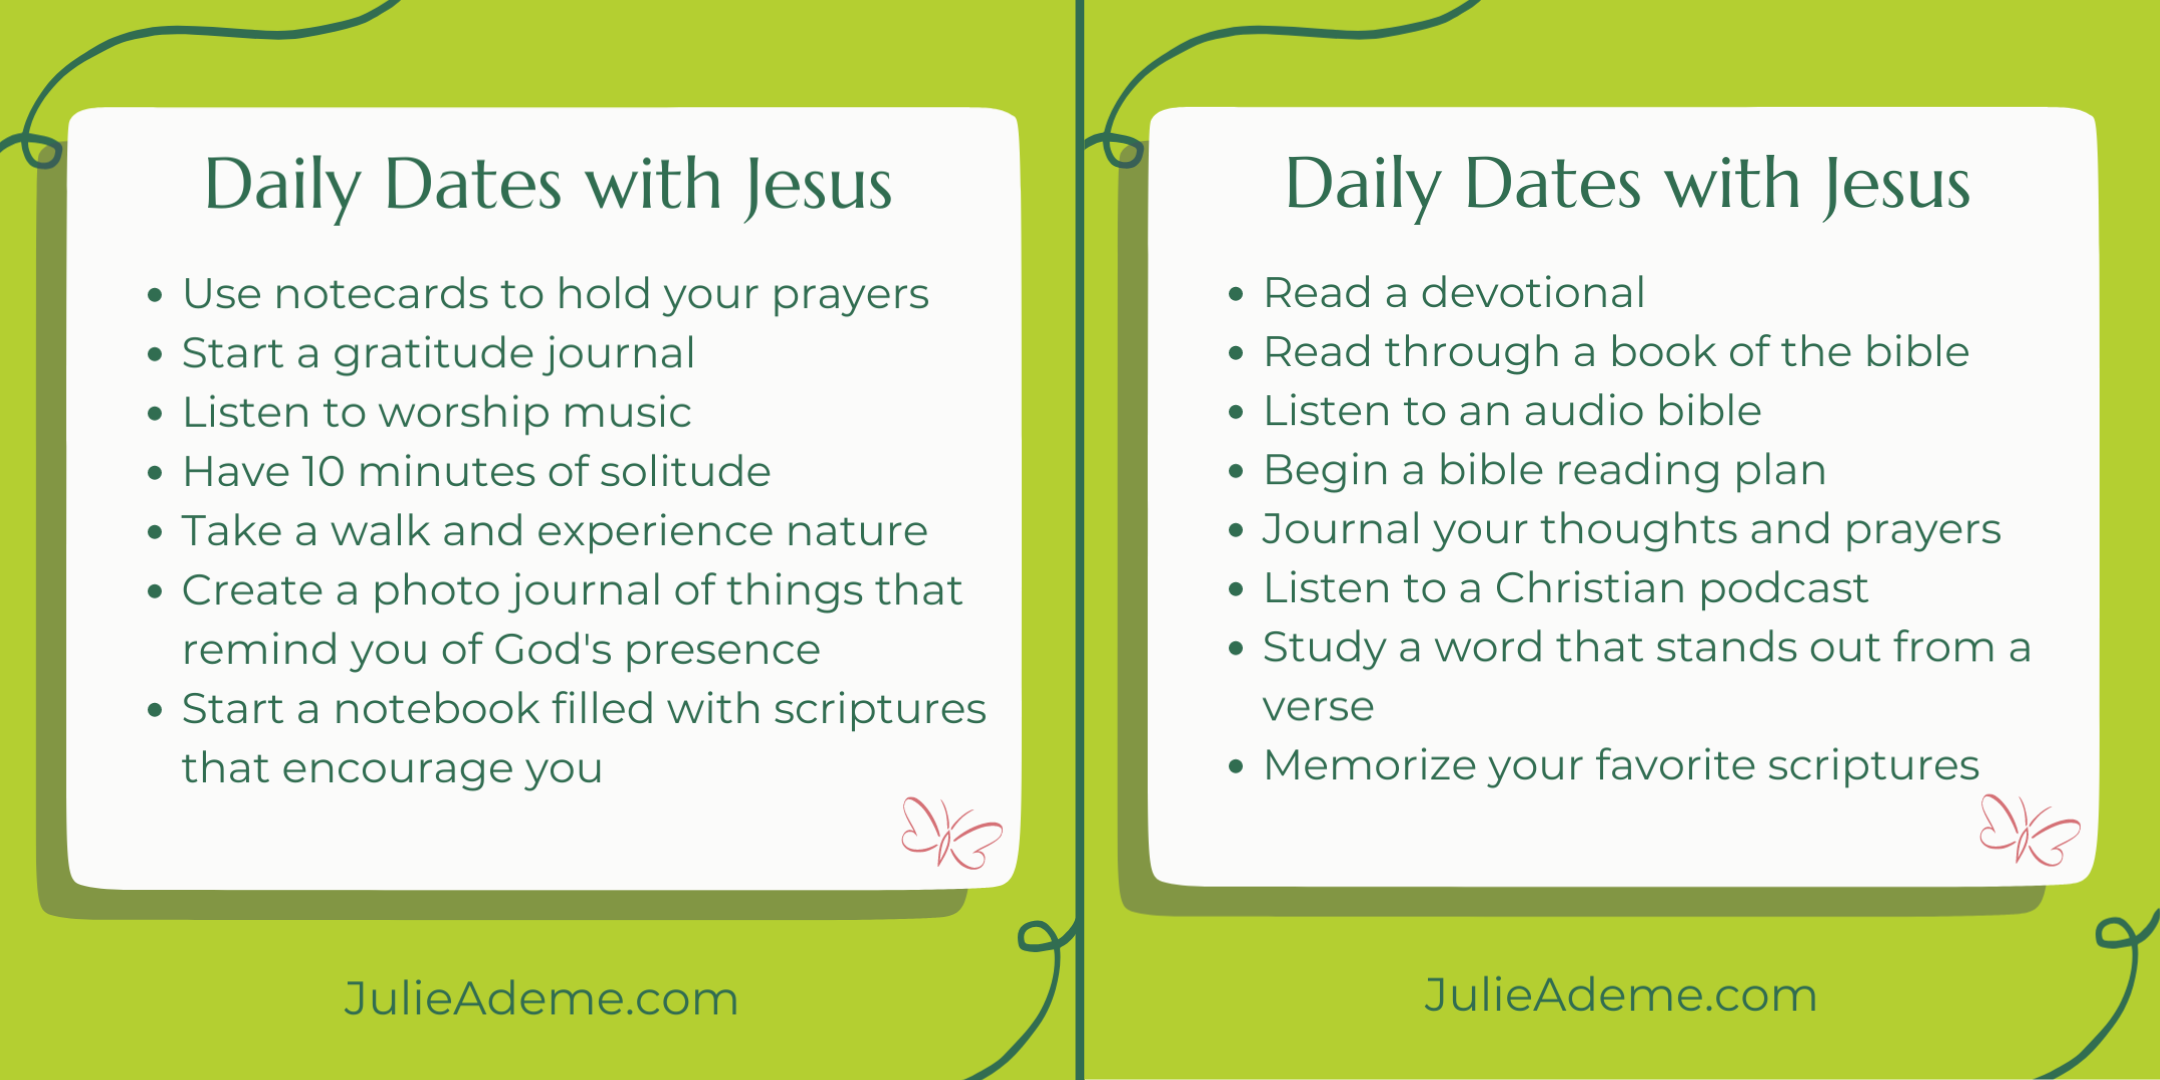 Daily dates with Jesus help us thrive